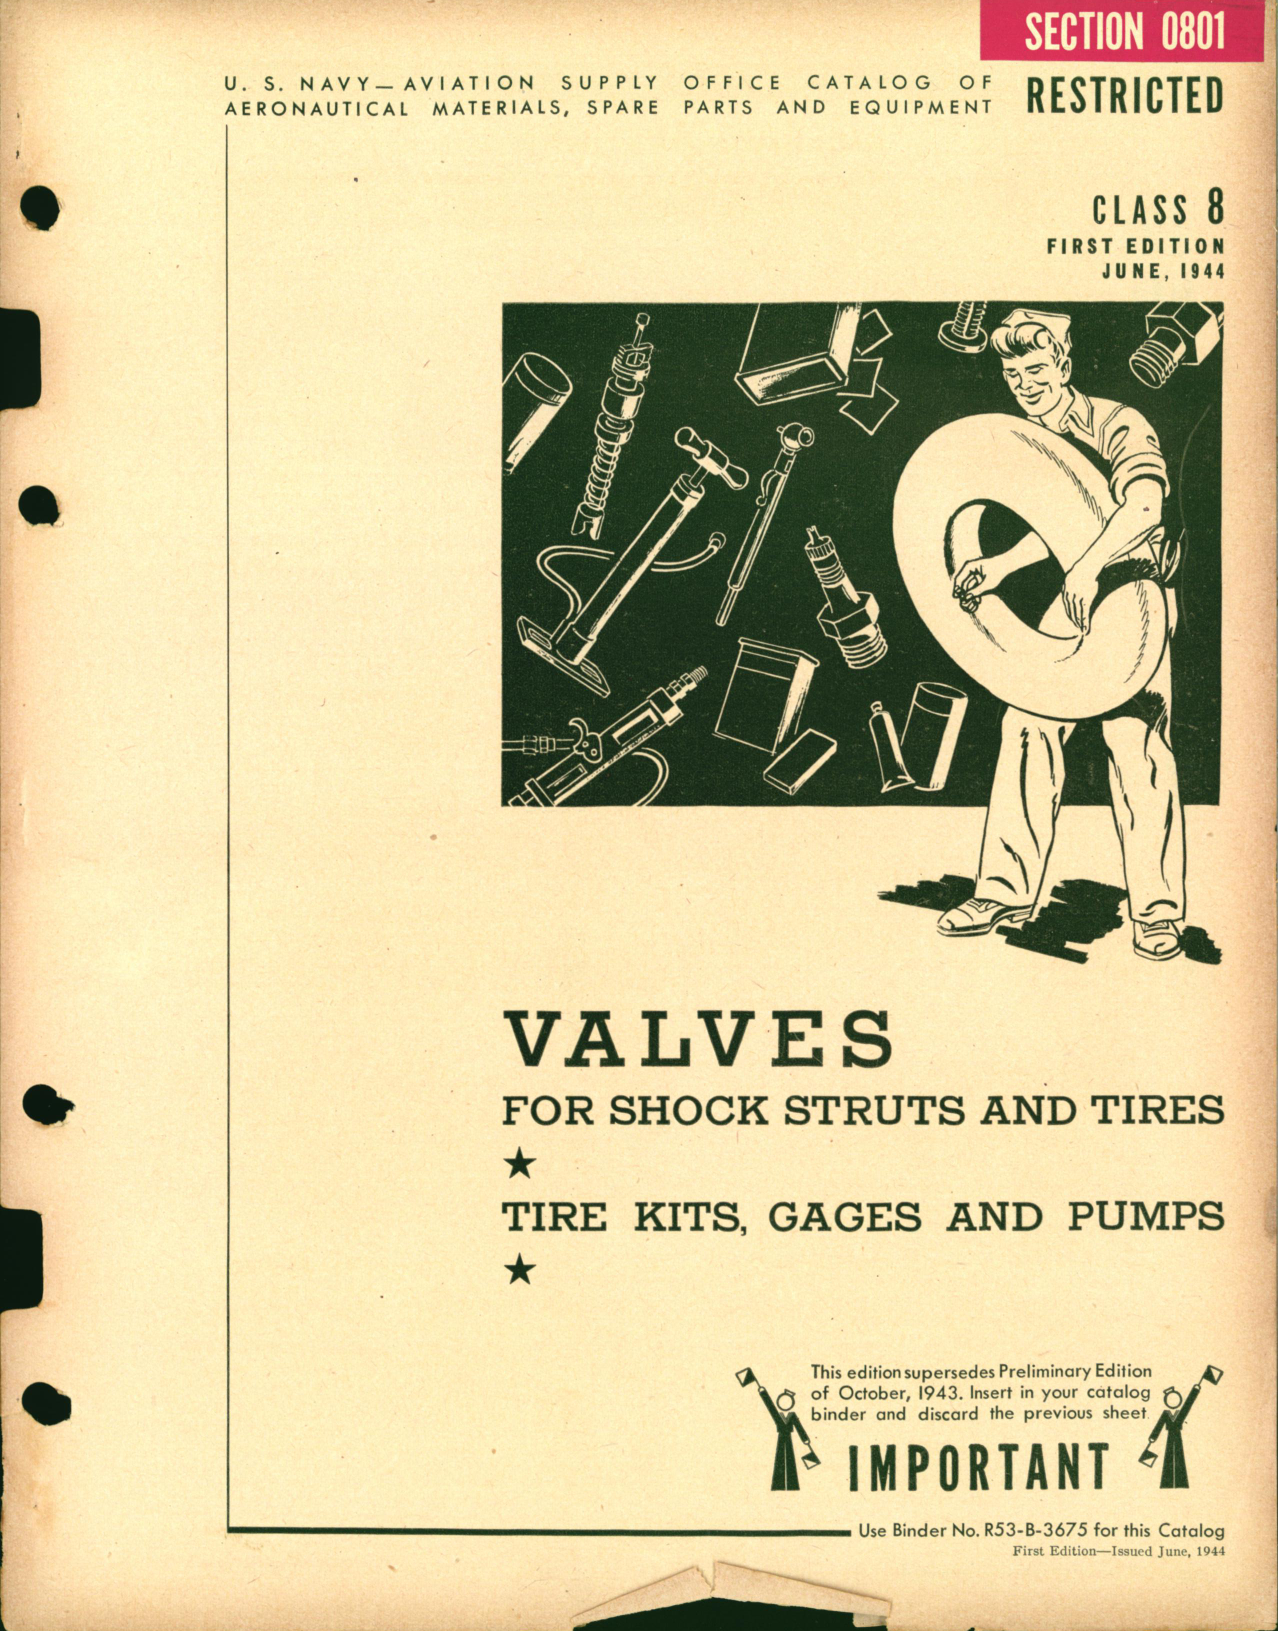 Sample page 1 from AirCorps Library document: Valves for Shock Struts and Tires, tire Kits, Gages and Pumps